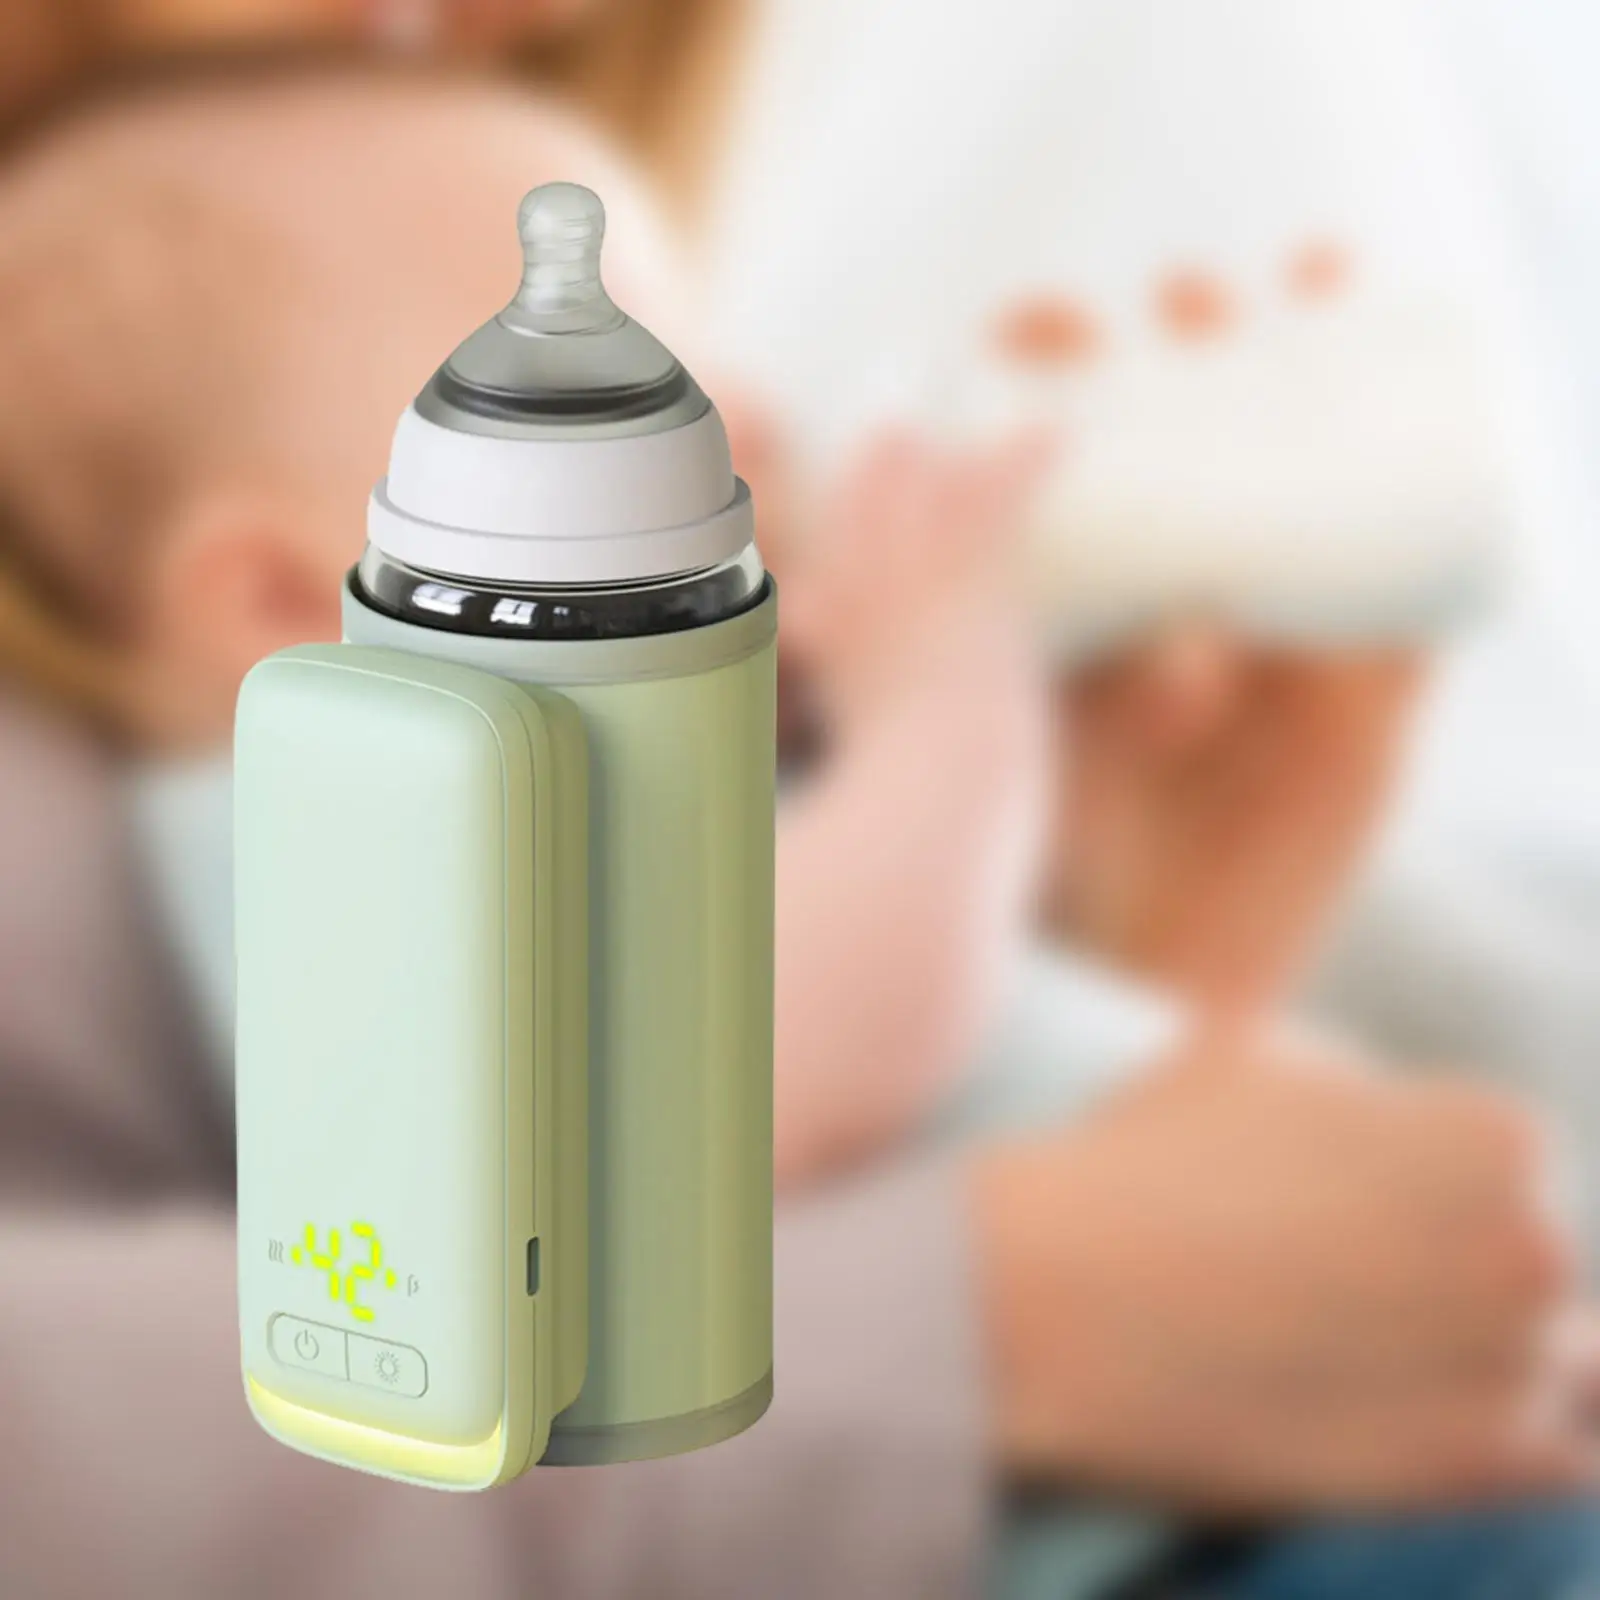 Baby Bottle Warmer Night Light Function Heating Sleeve Adjustable for Outdoor Activities Night Feeding Daily Use Picnics Travel